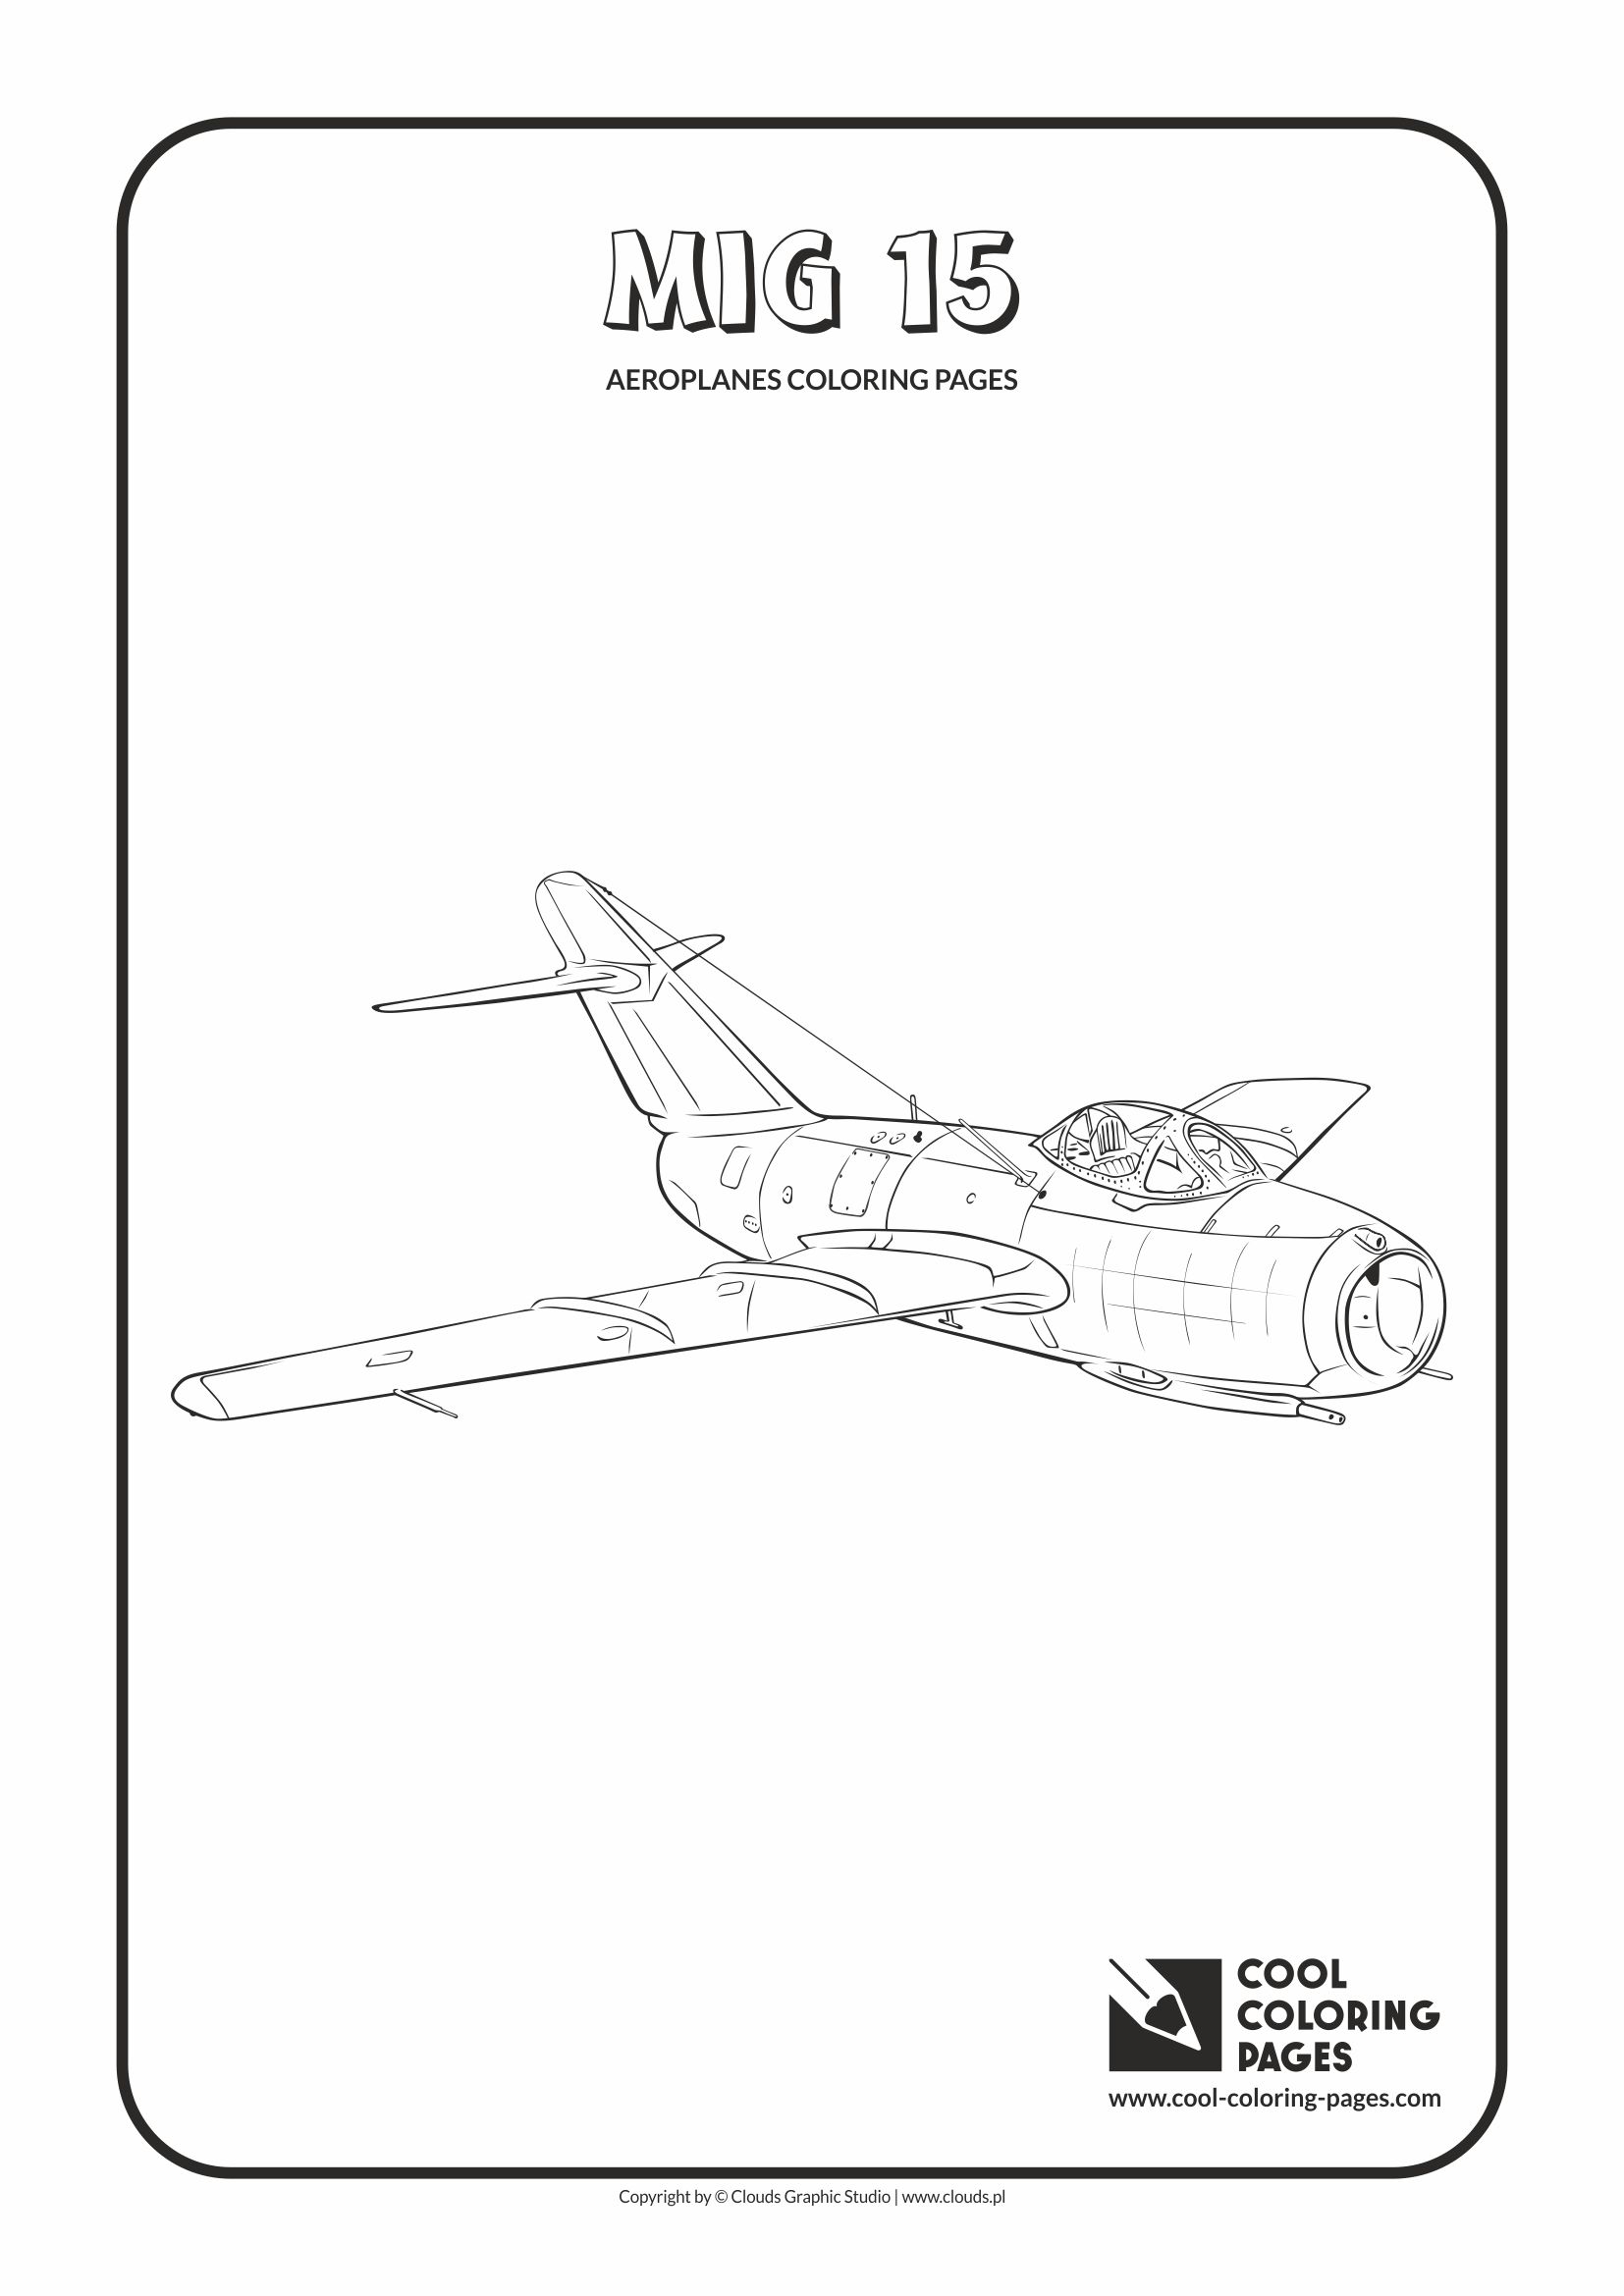 Cool Coloring Pages - Vehicles / Mig 15 / Coloring page with Mig 15